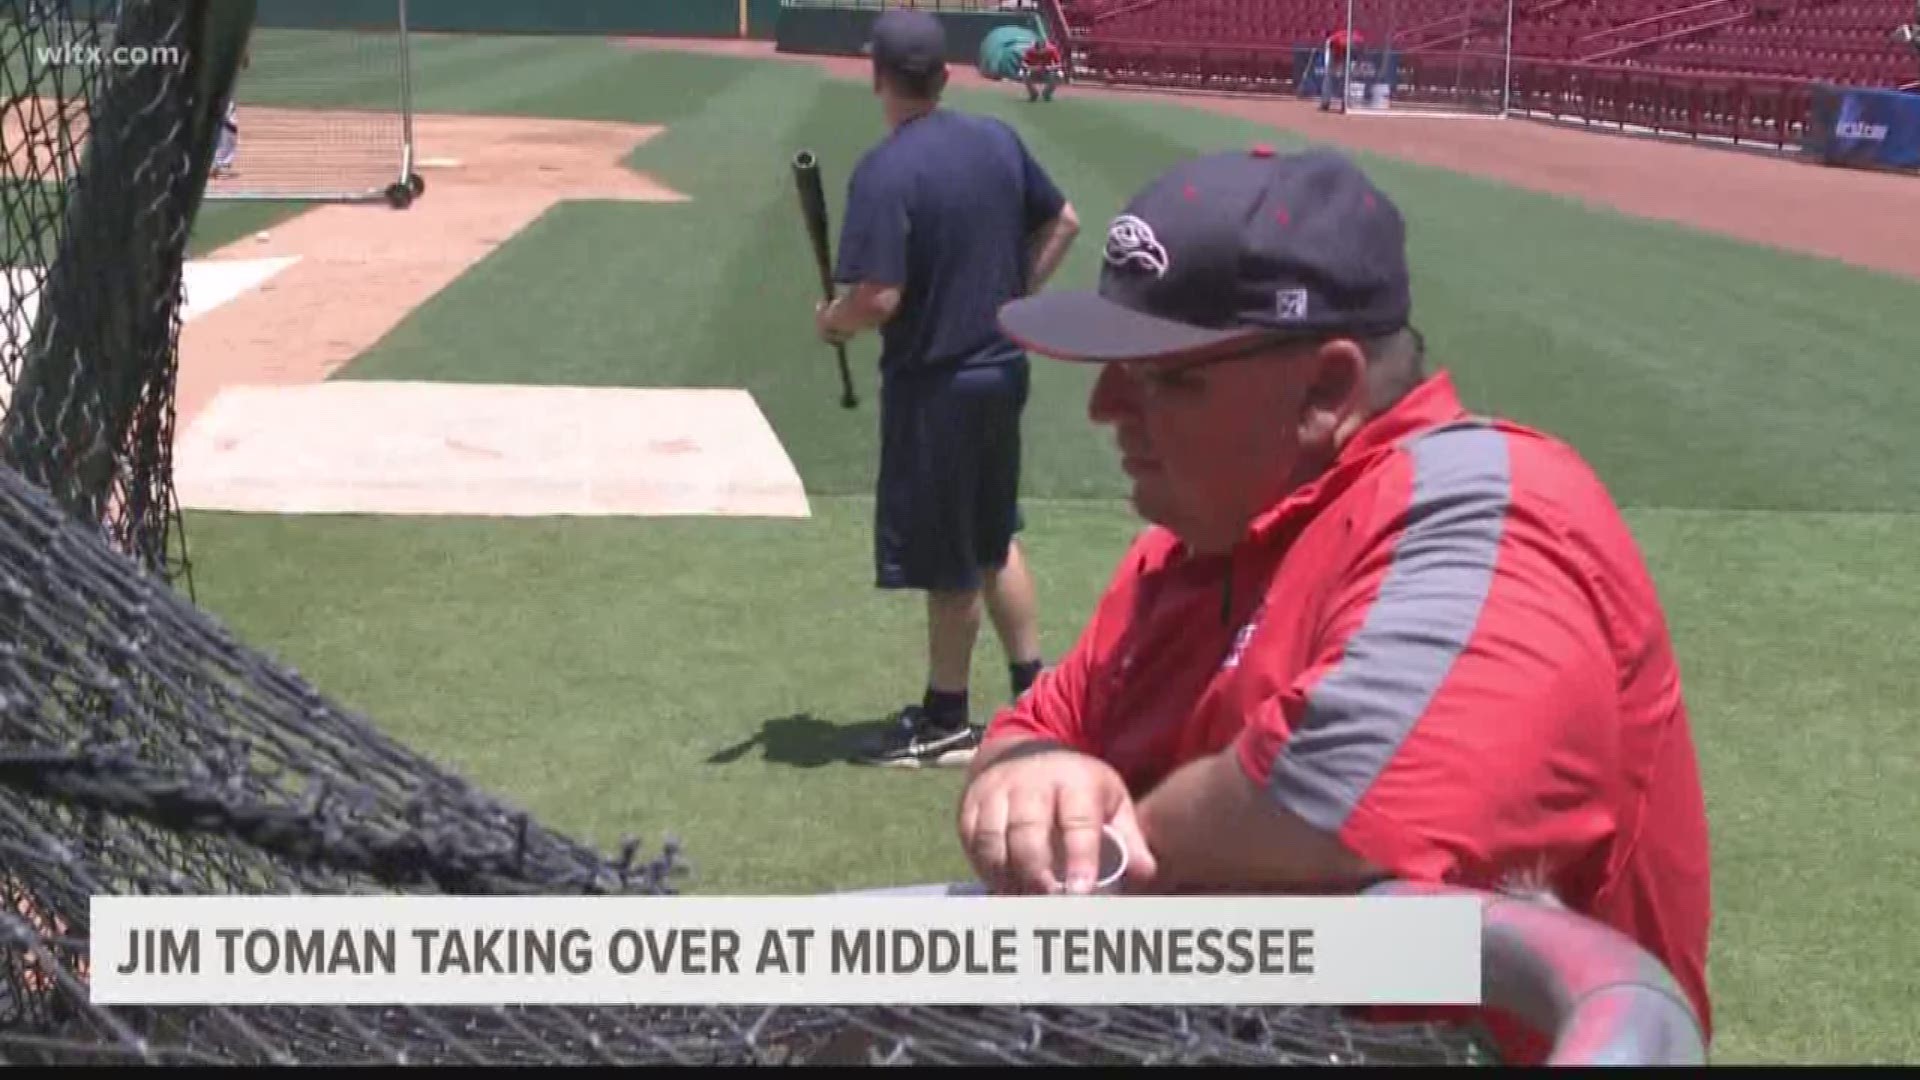 Former USC assistant baseball coach Jim Toman has been named the new head coach at Middle Tennessee State University.